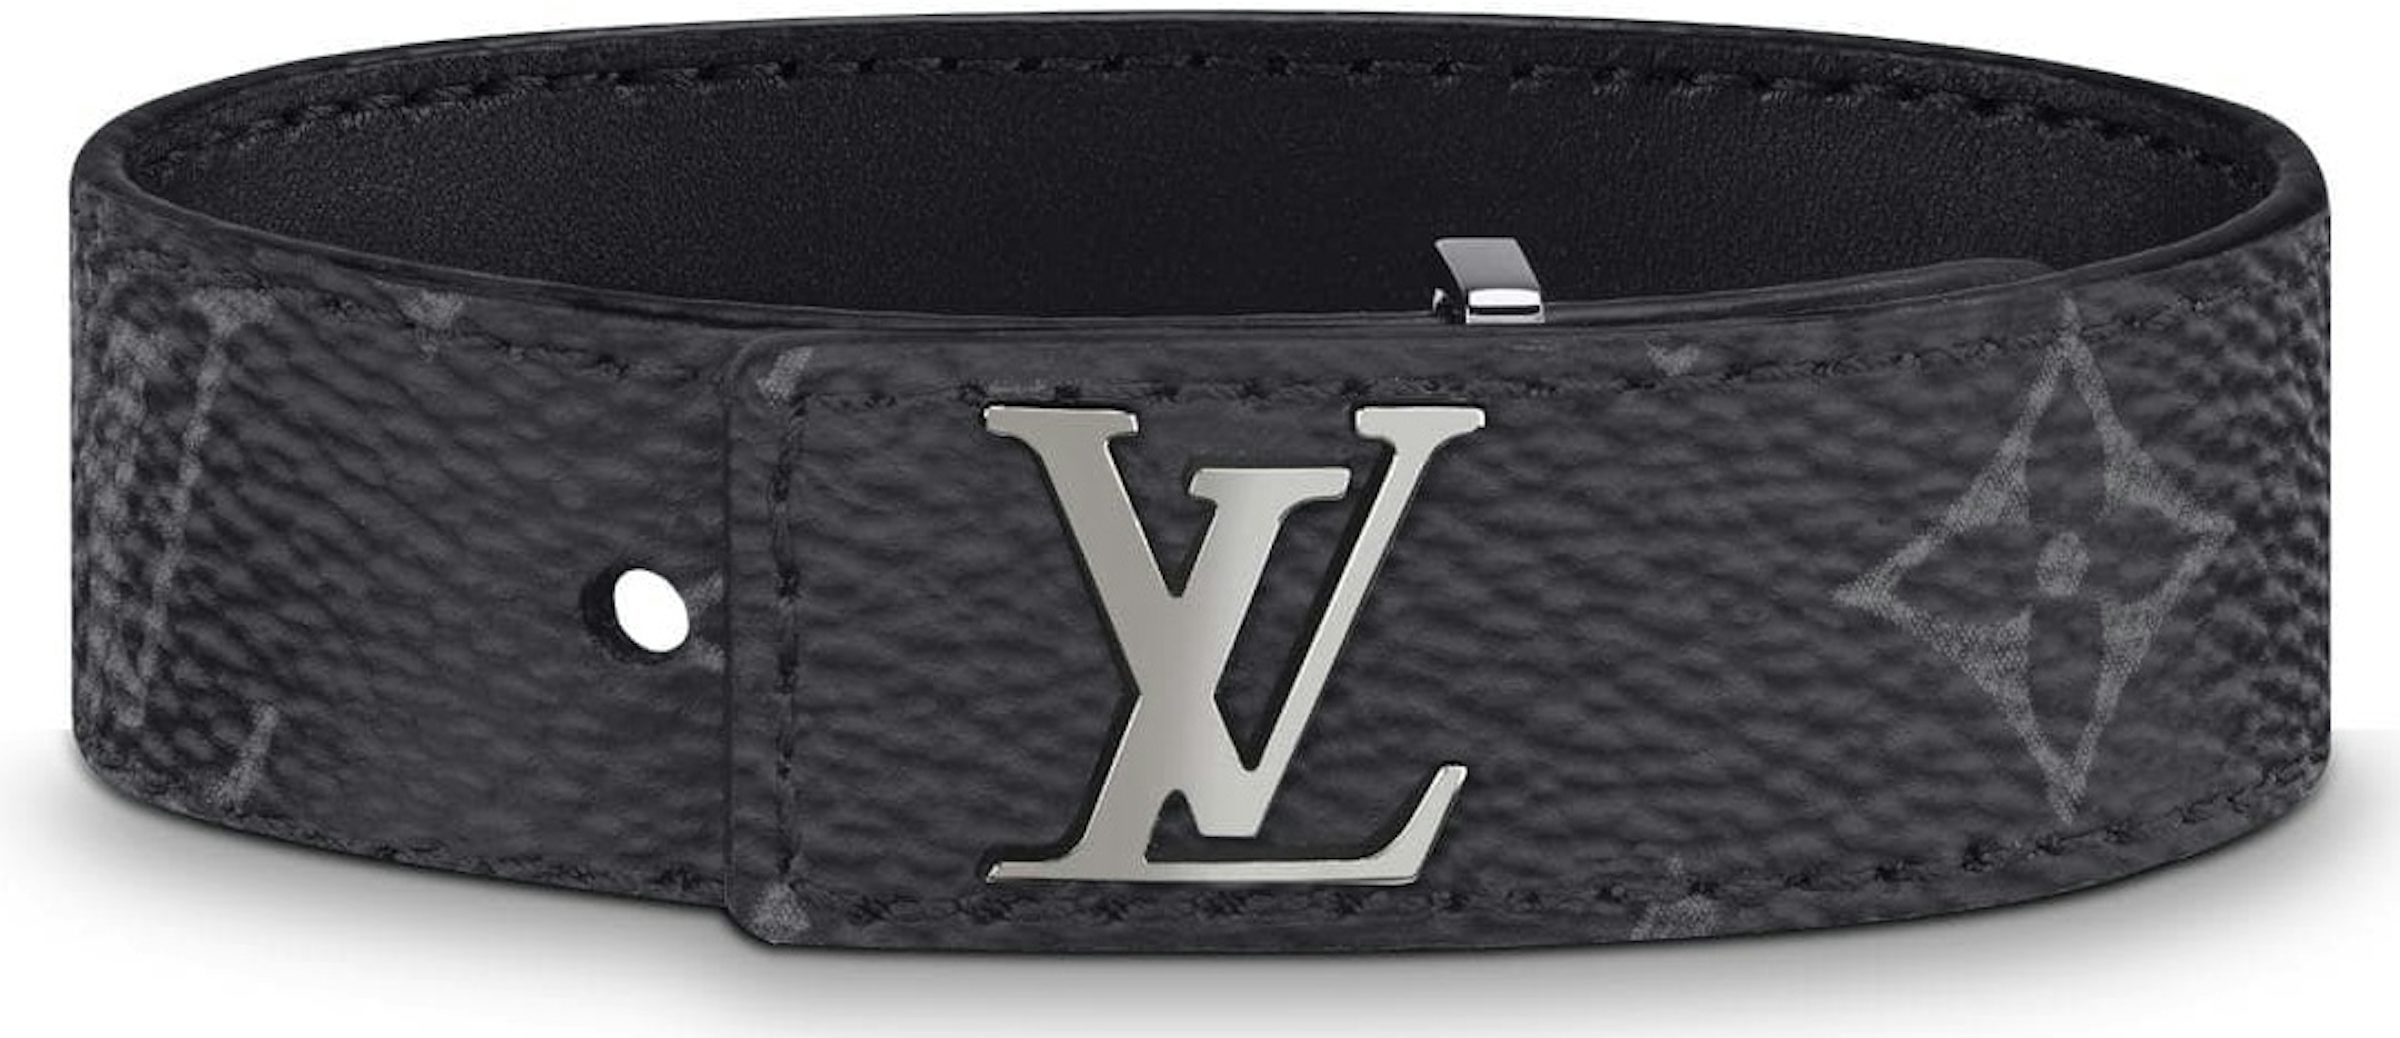 Buy Louis Vuitton Other Jewelry Accessories - Colour Black - StockX